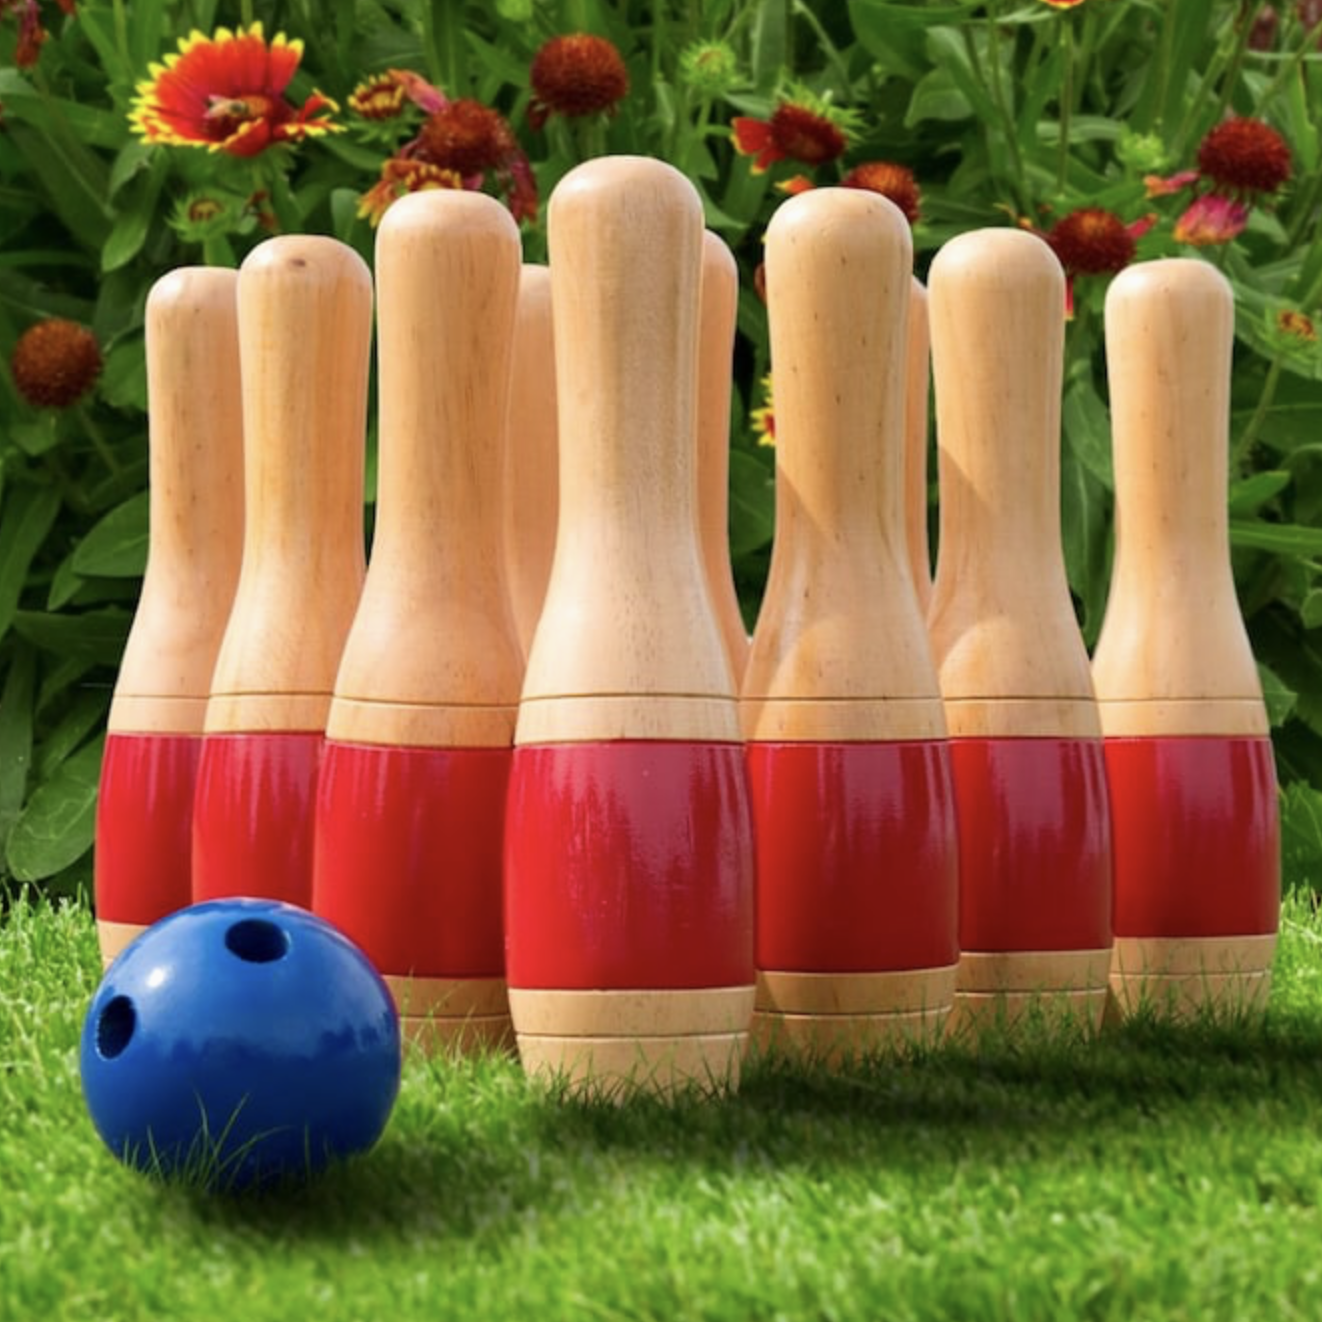 Lowes lawn bowling.png